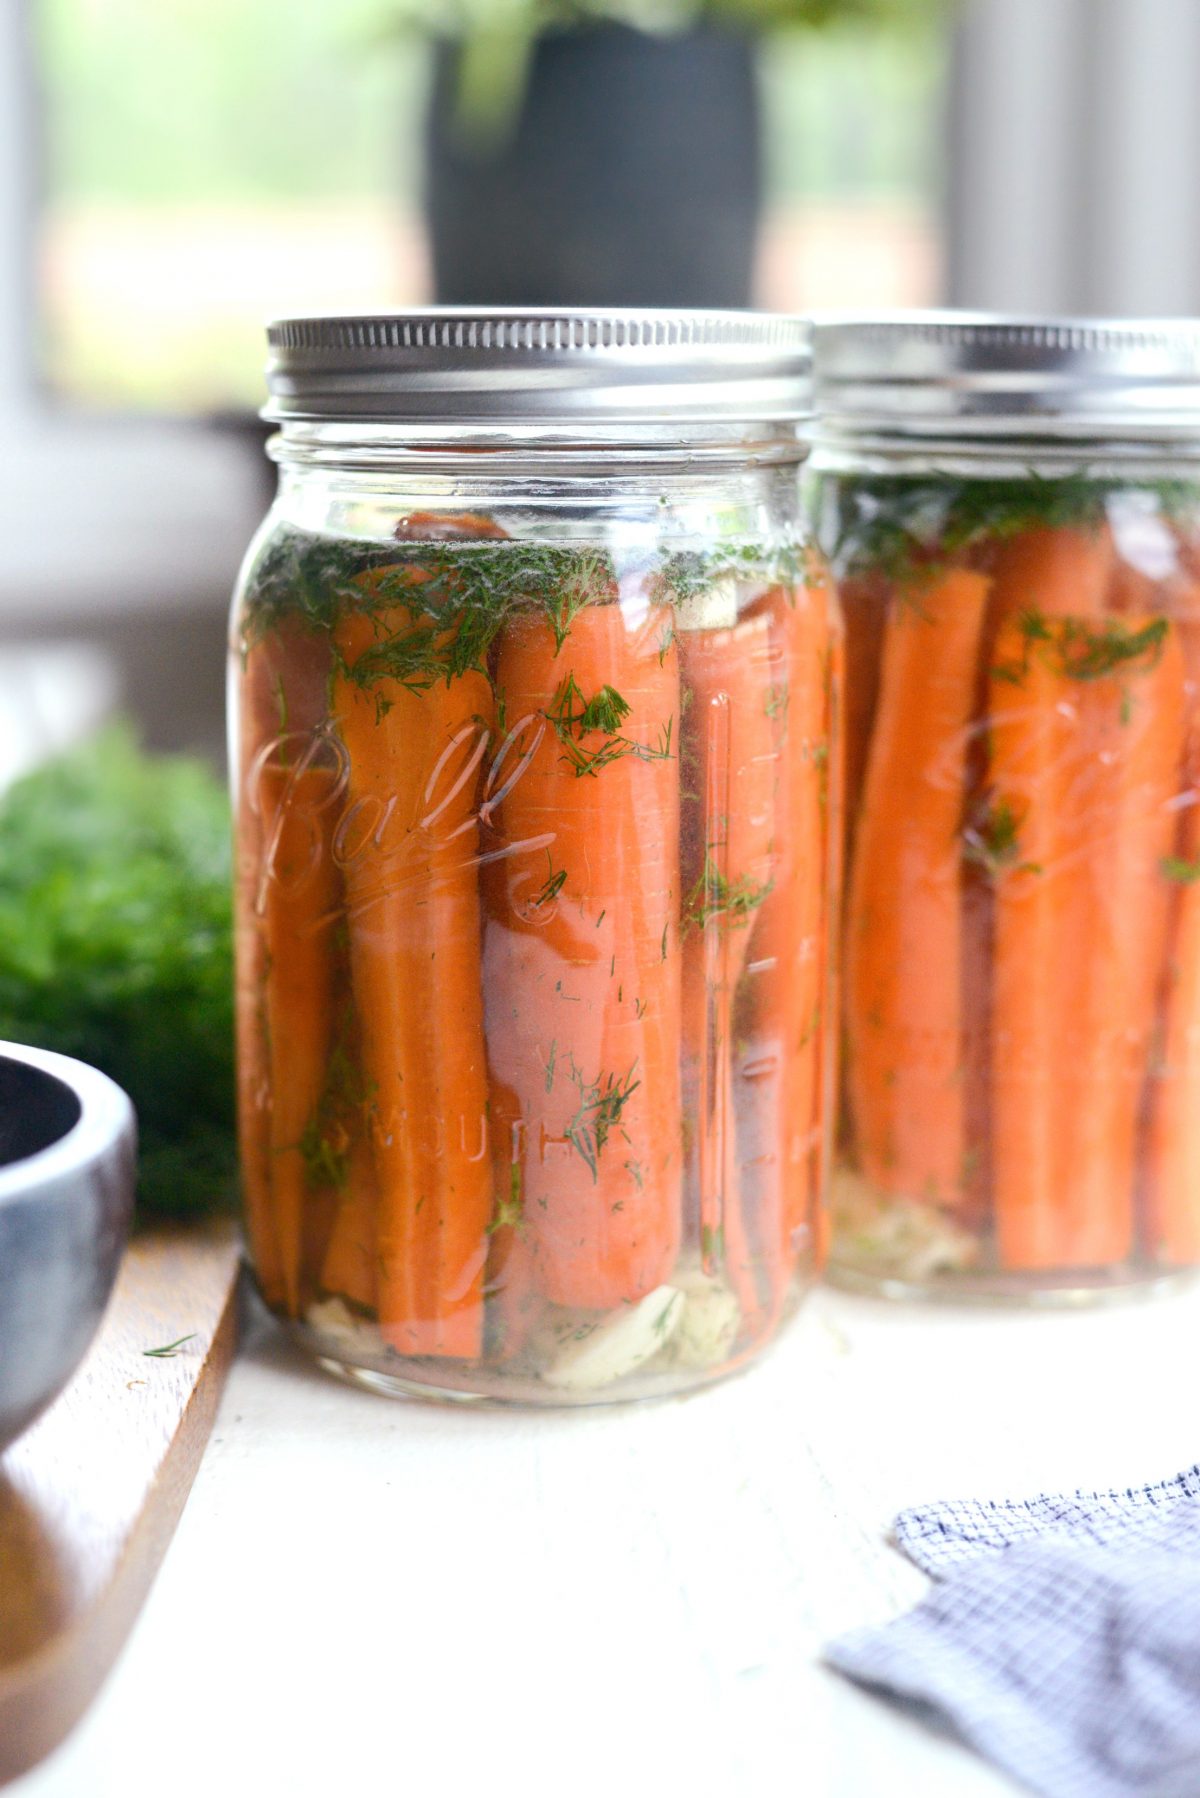 lids on jars of Naturally Fermented Dilly Carrots